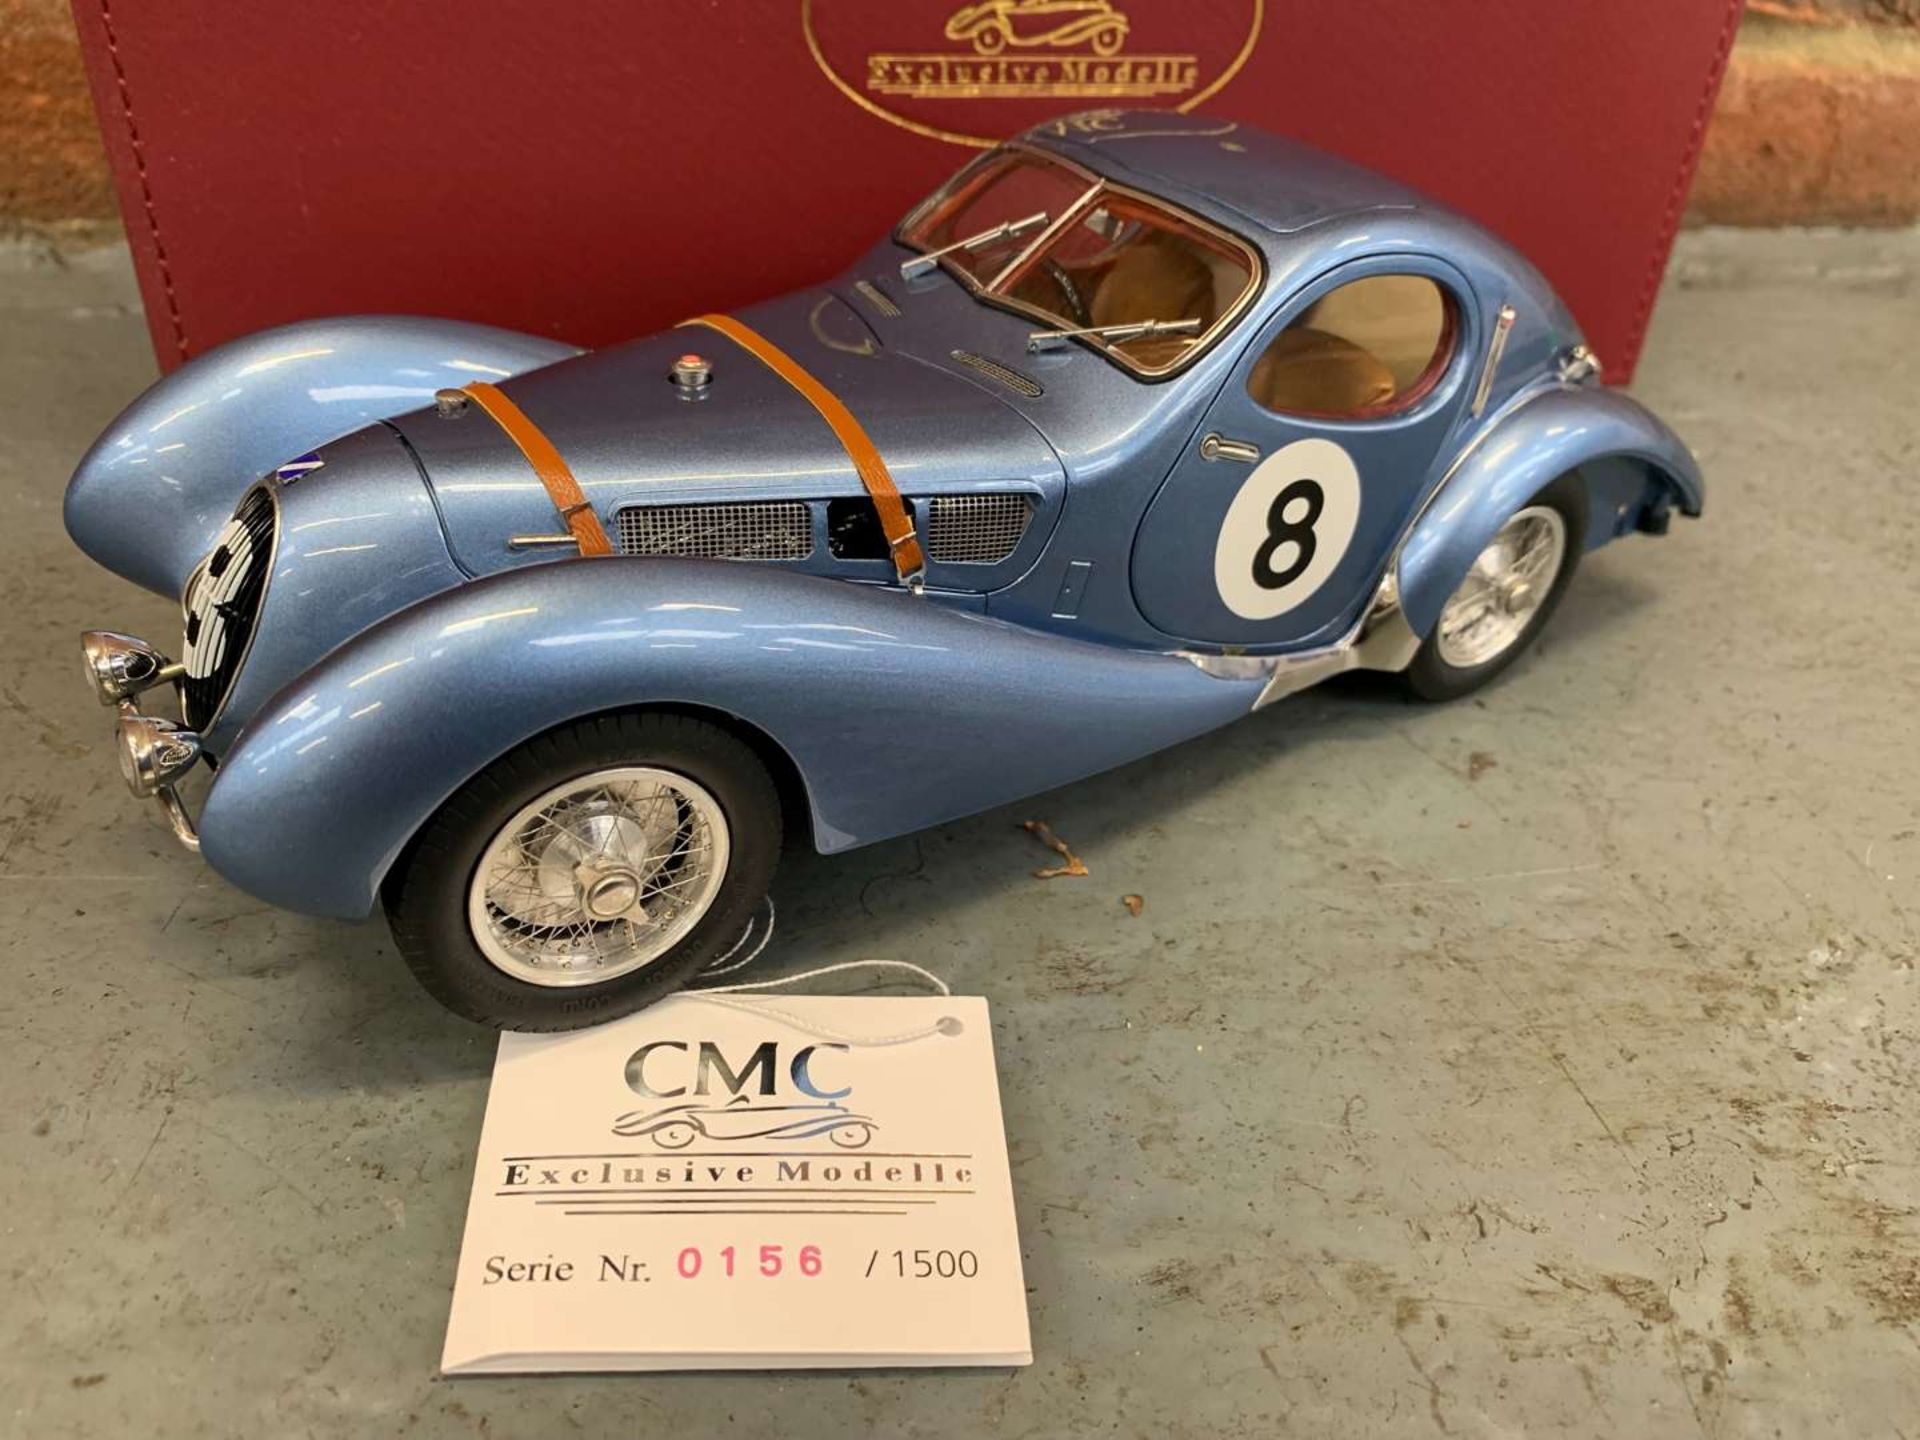 CMC Talbot Lago Coupe T150 C-55 1:18 Scale Boxed Model - Image 4 of 6